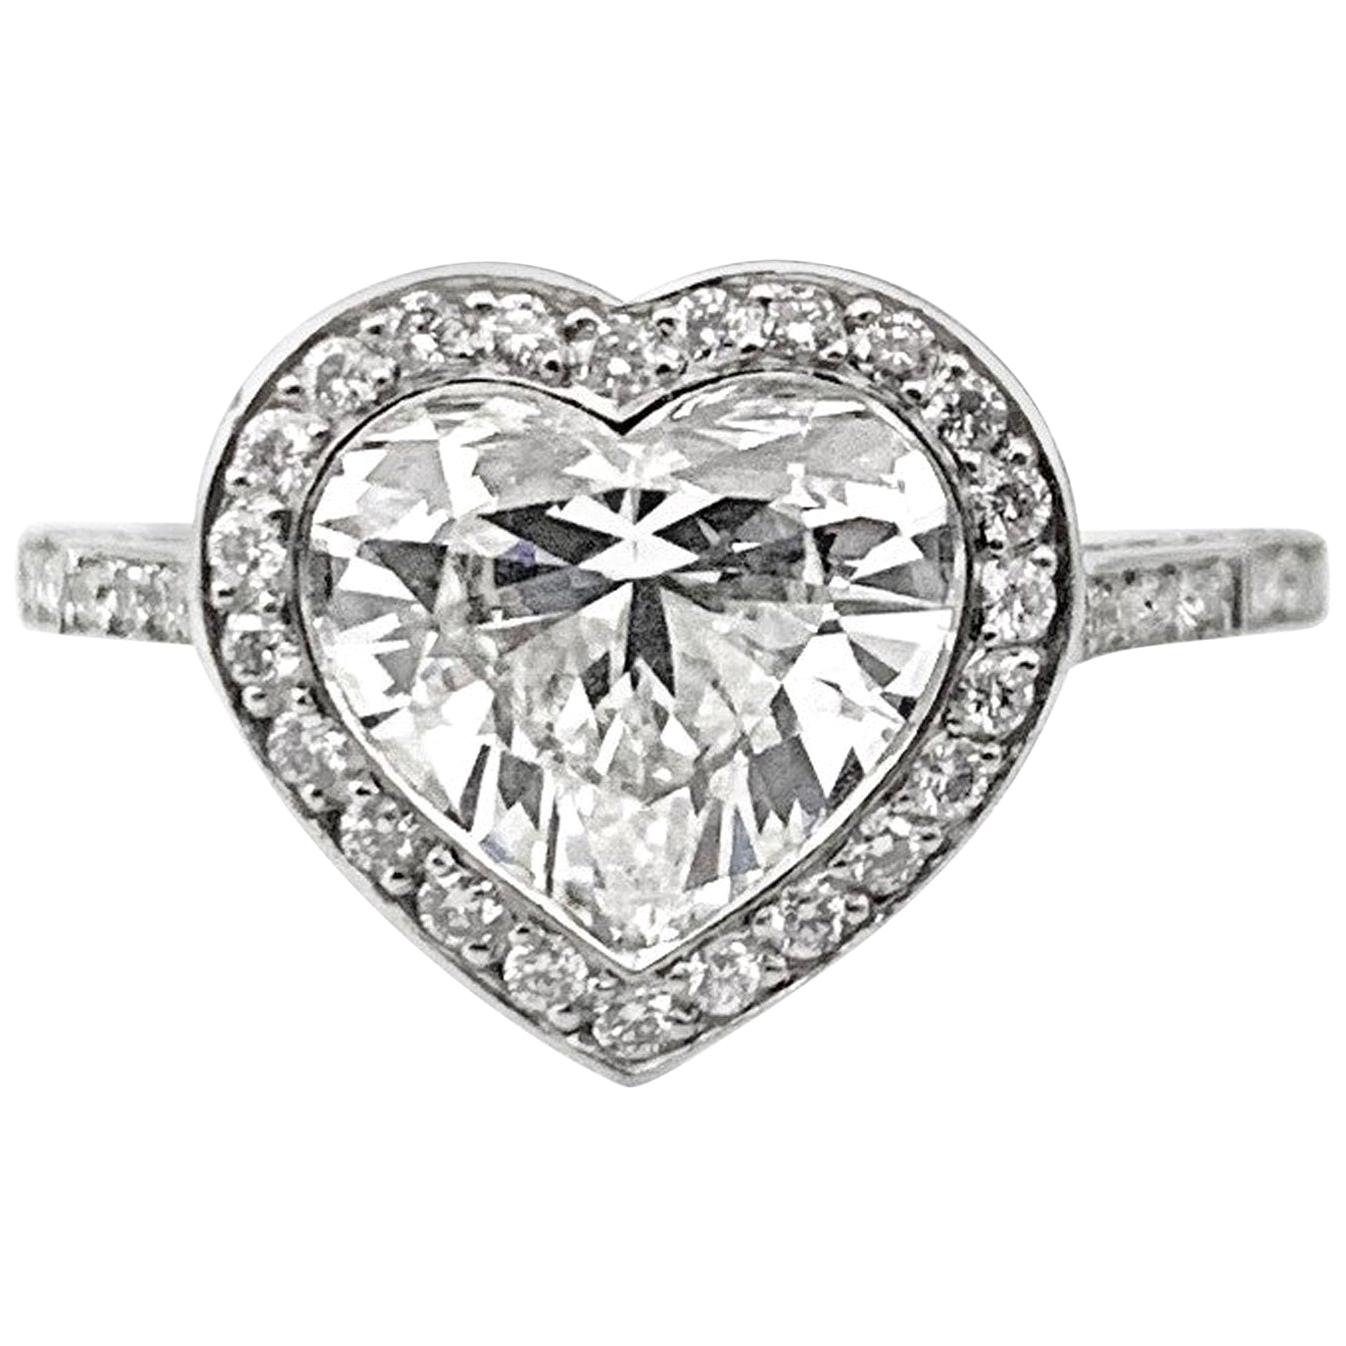 GIA Certified 1.63 Carat Heart Shaped Diamond 18K Gold Ring For Sale 2